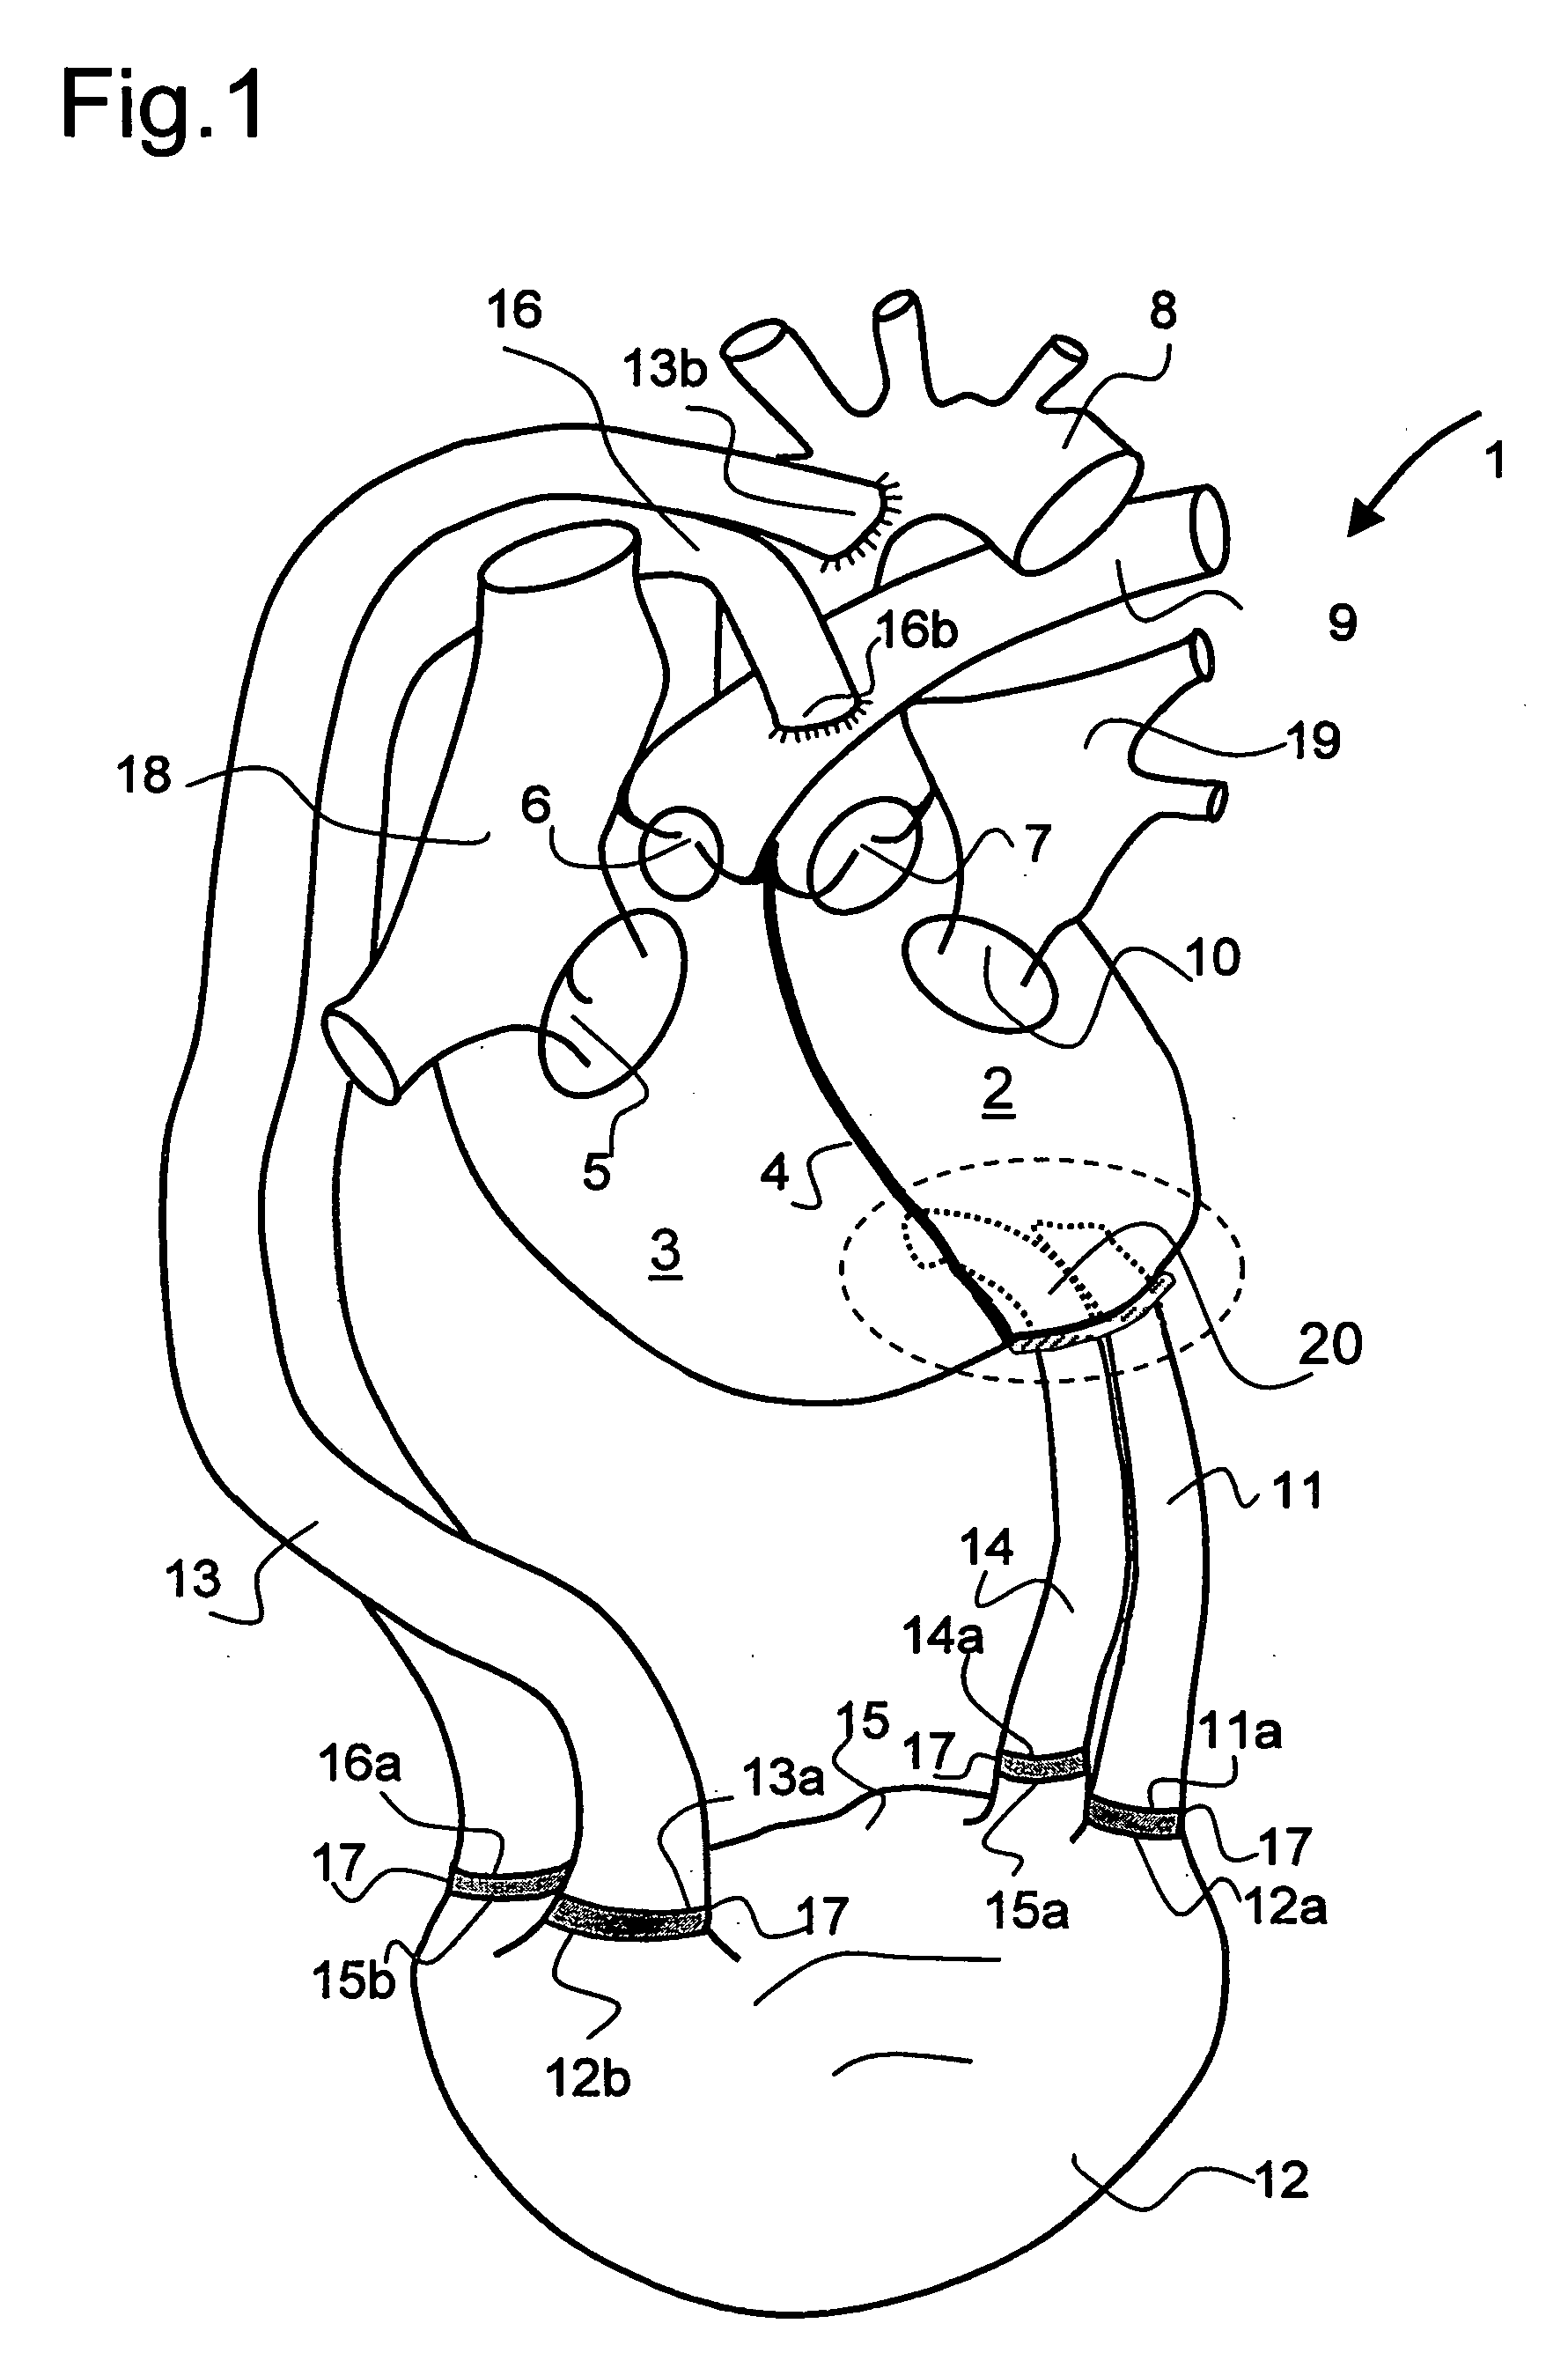 Device for connecting a cardiac biventricular assist means